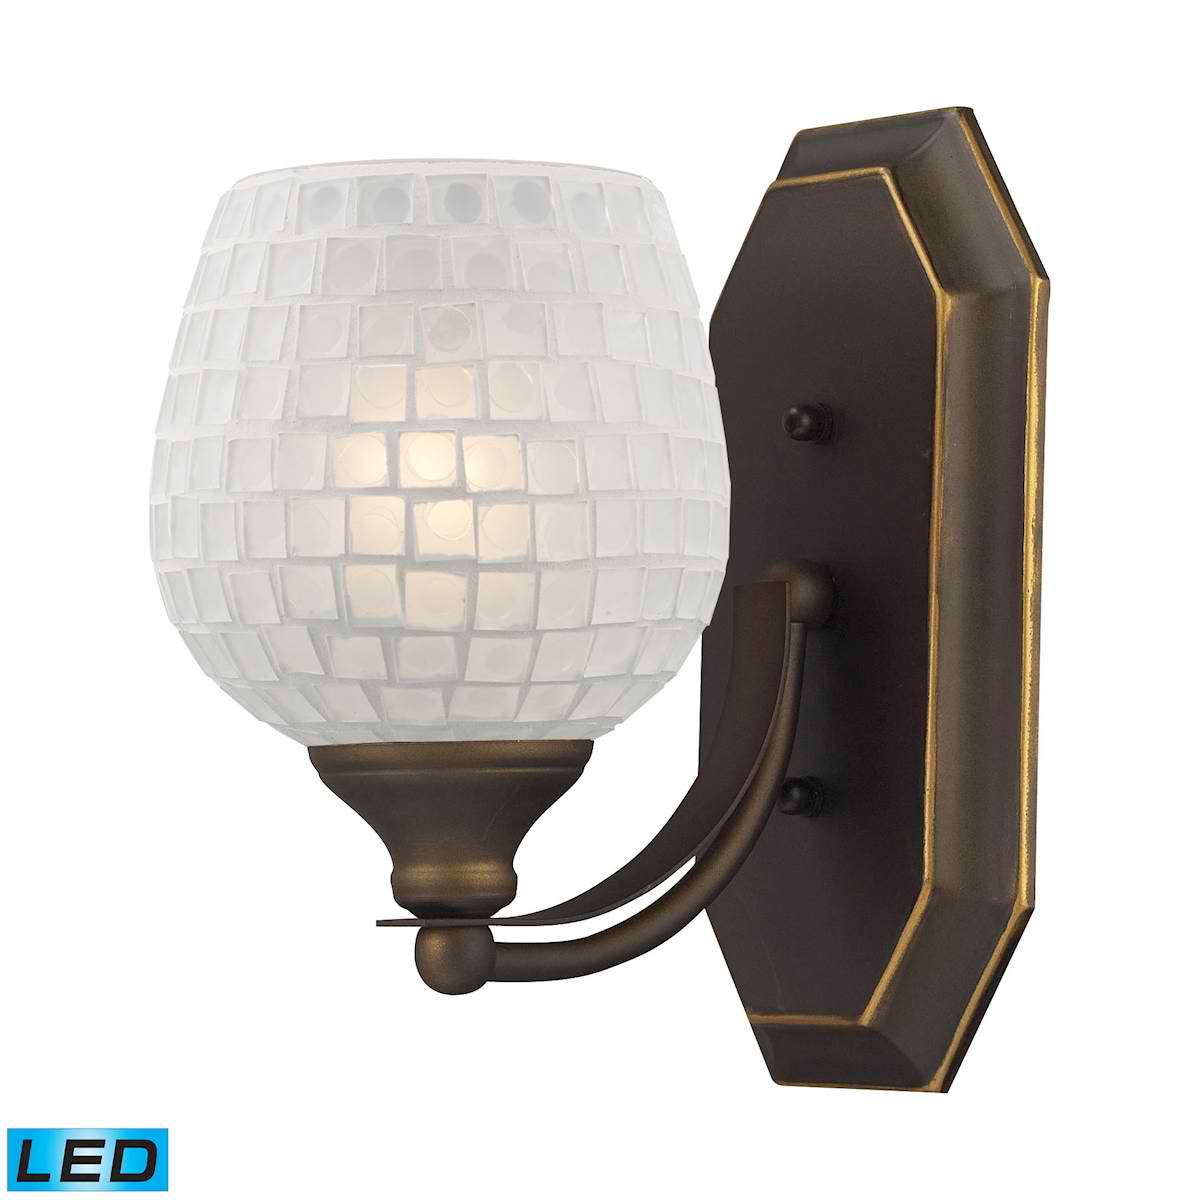 1 Light Vanity in Aged Bronze and White Mosaic Glass - LED Offering Up To 800 Lumens (60 Watt Equivalent)